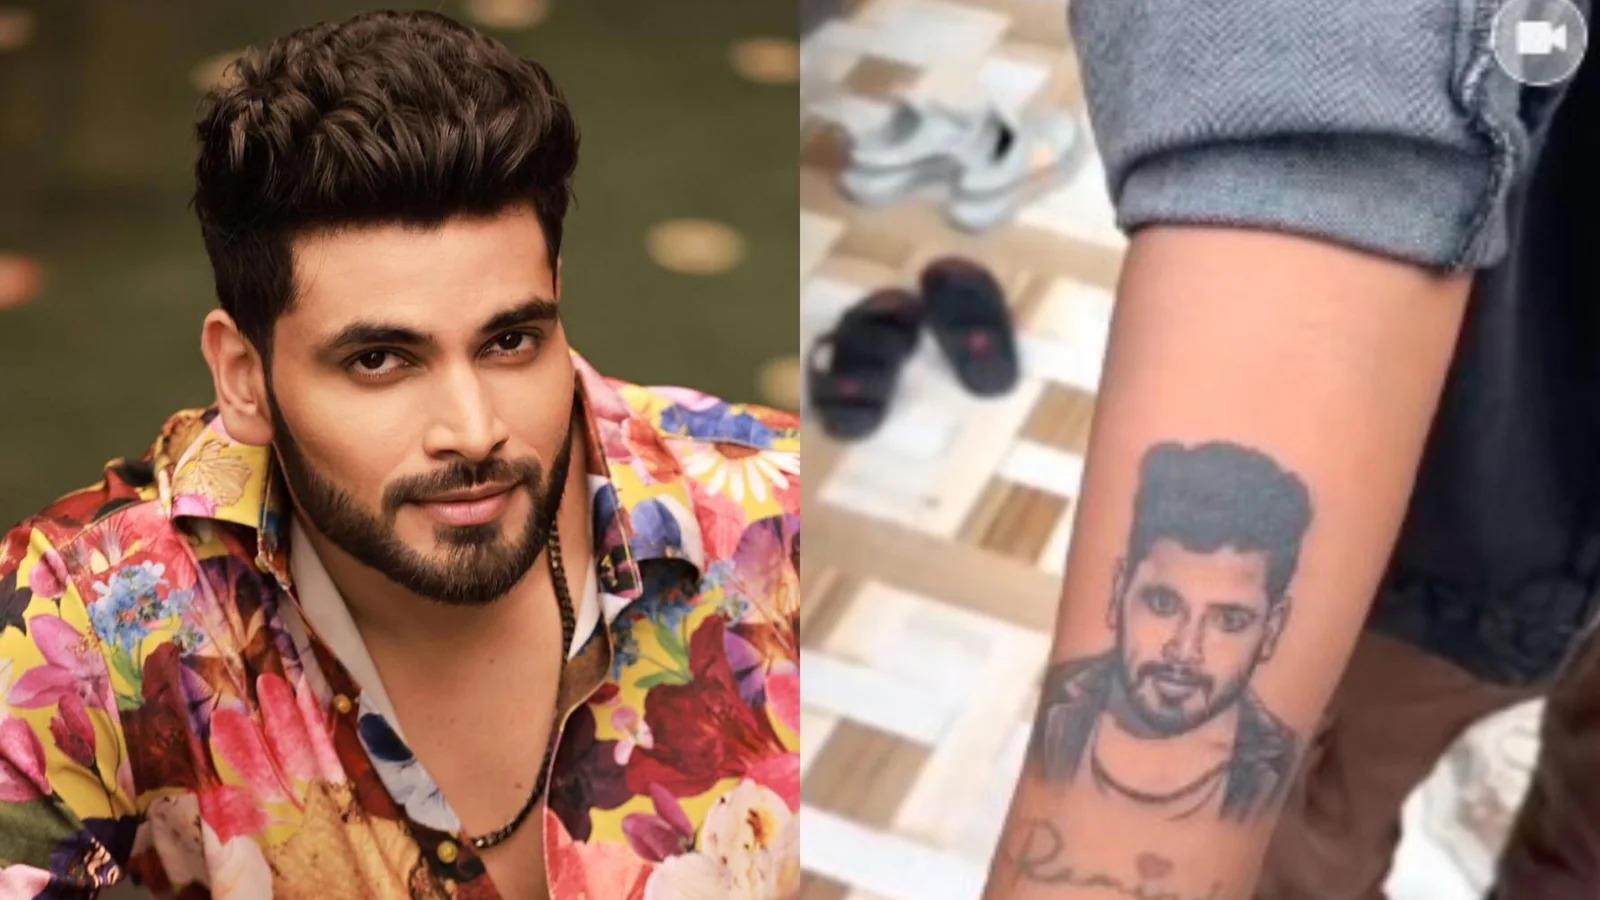 Shiv Thakare reacts to a fan getting his face tattooed on arm; says, “Pressure ho jata hai”